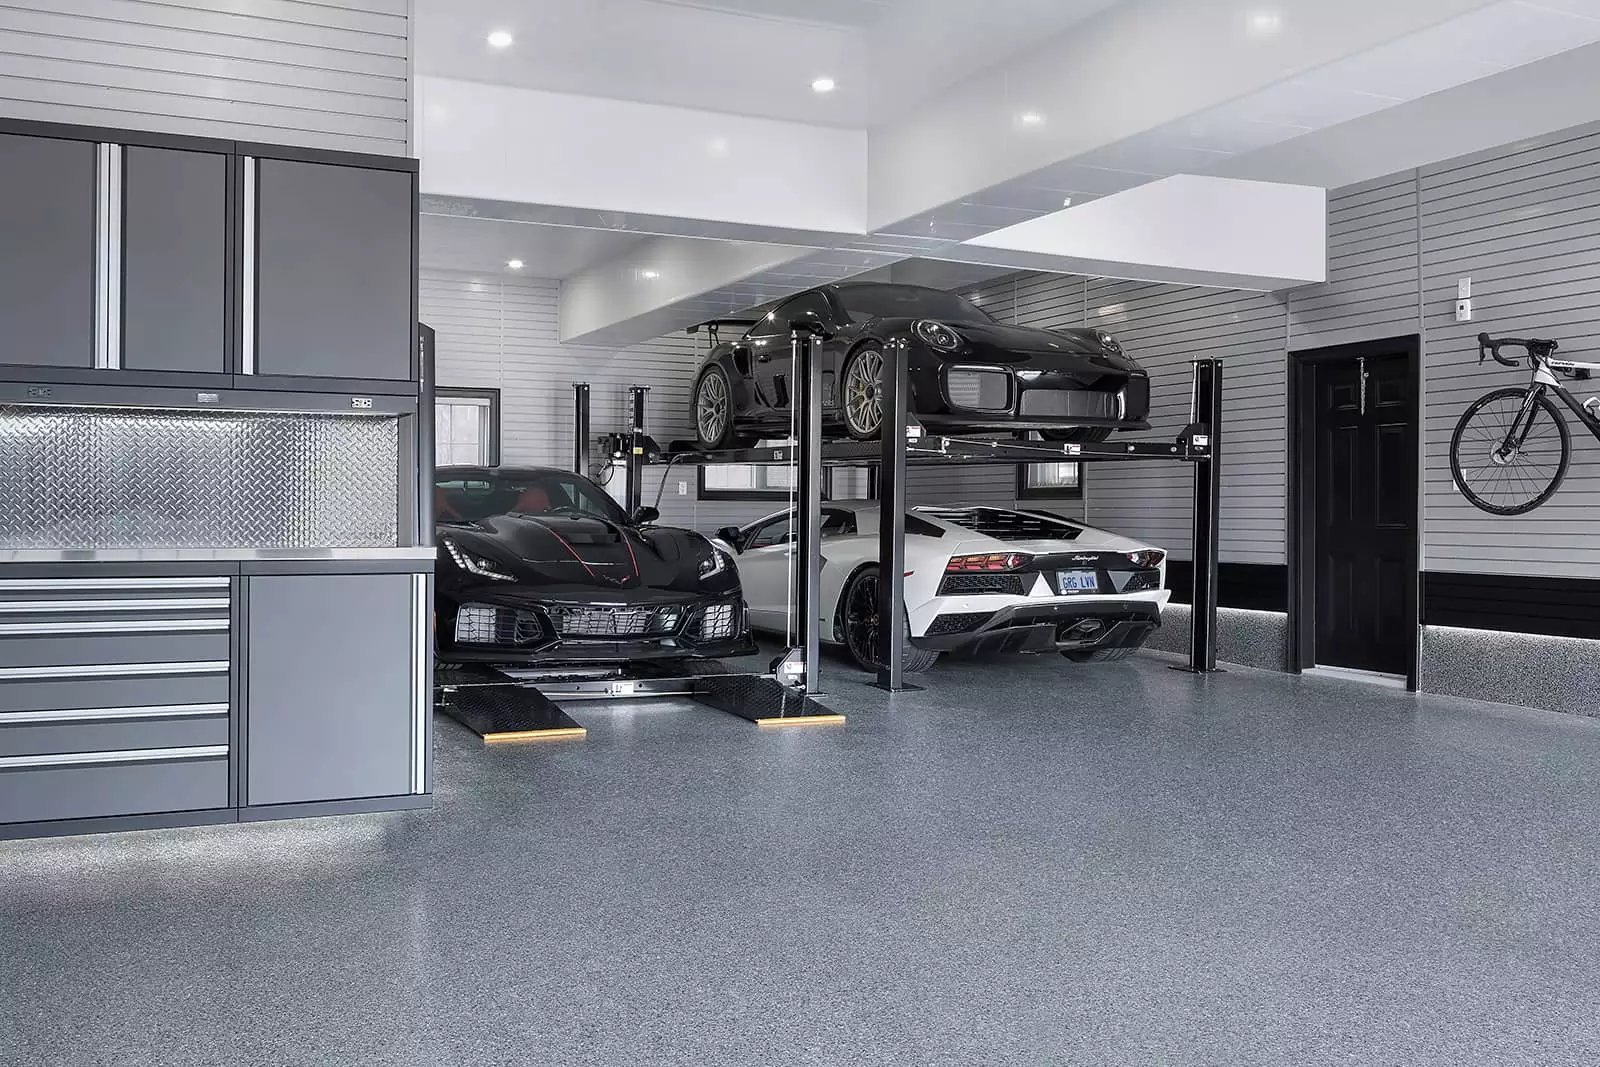 xdouble-car-lift-wide-shot-garage.jpg.pagespeed.ic.skWmqemEfj